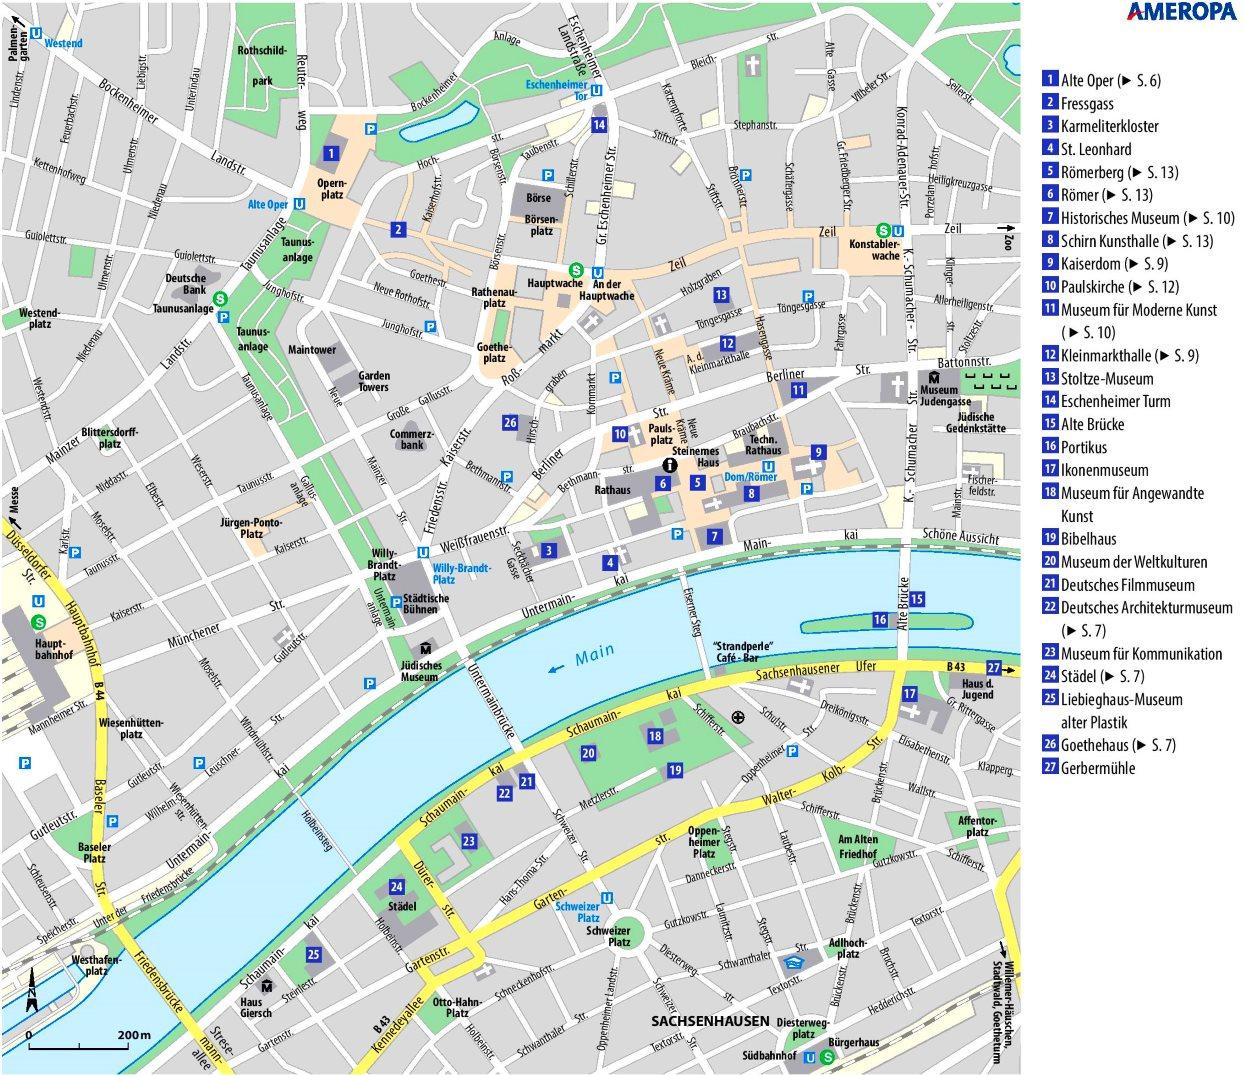 Map of Frankfurt tourist: attractions and monuments of Frankfurt